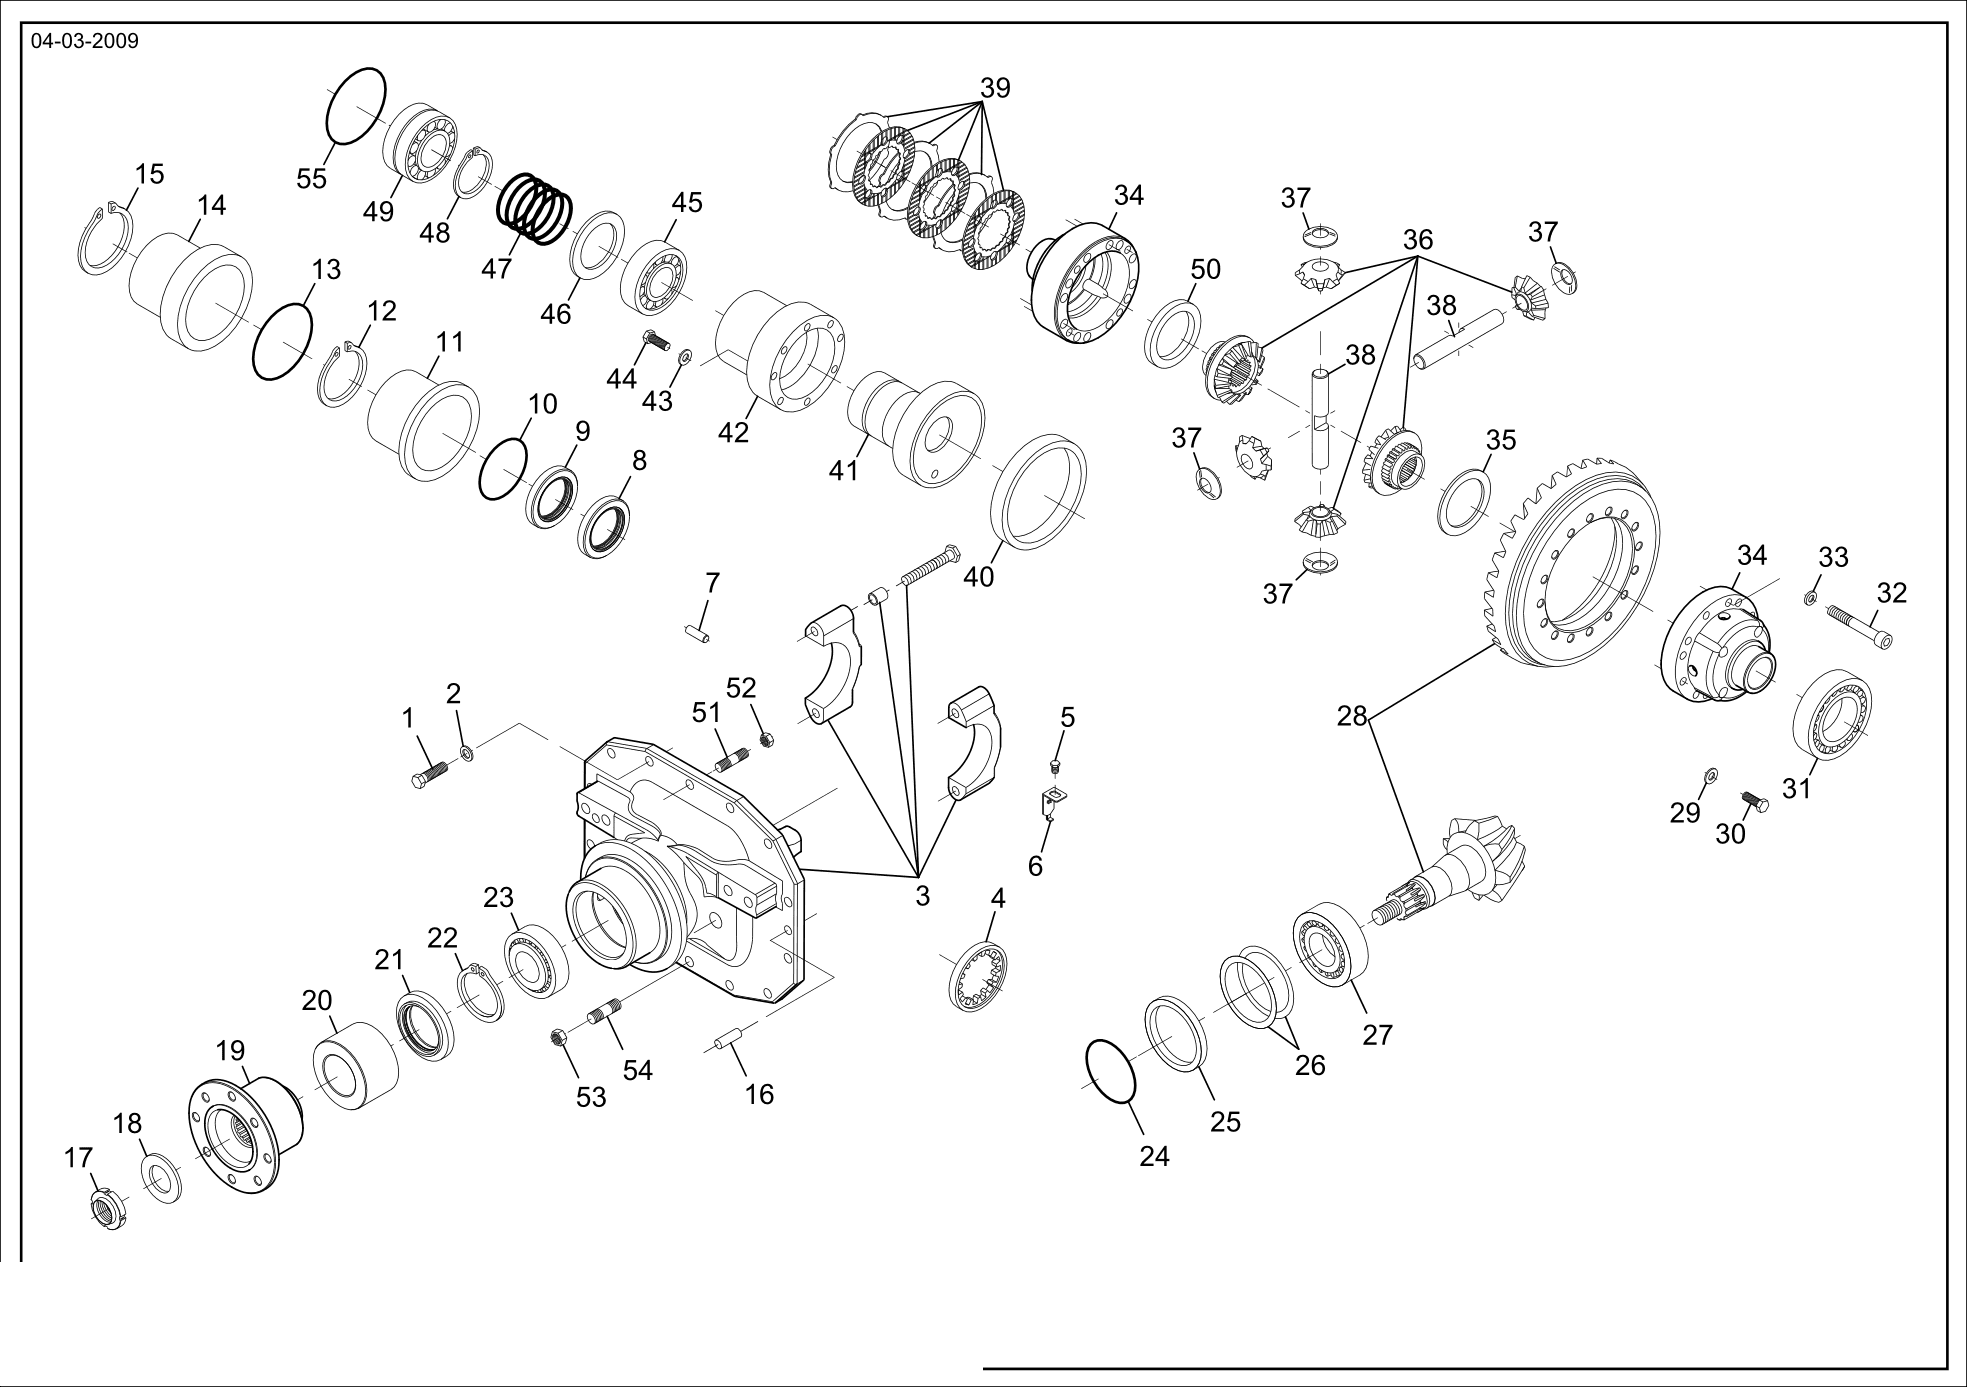 drawing for CNH NEW HOLLAND 87611463 - DOWEL (figure 5)